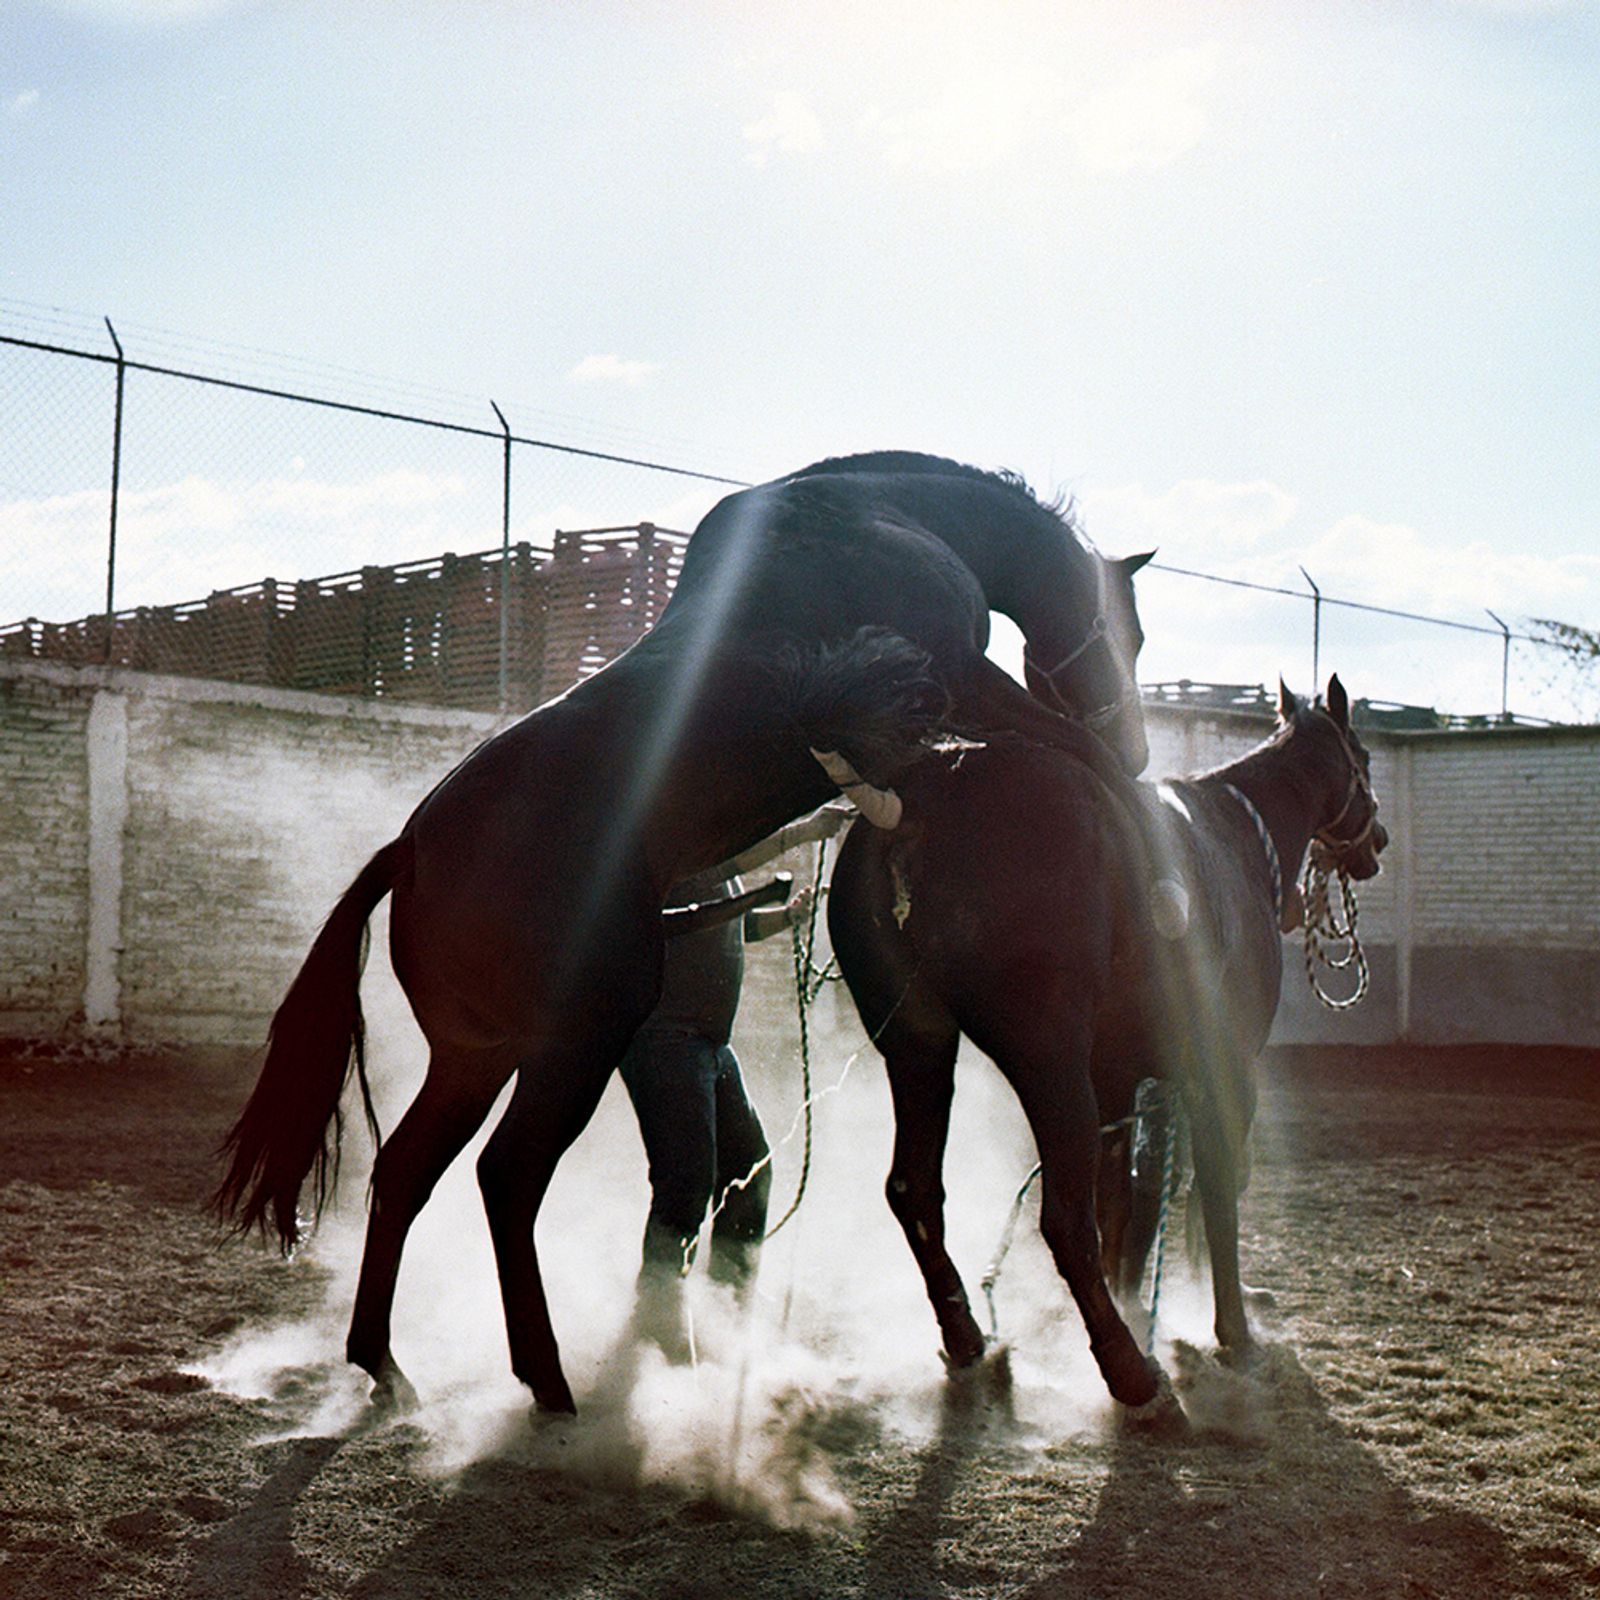 © Brenda Moreno - Image from the CABALLITO photography project